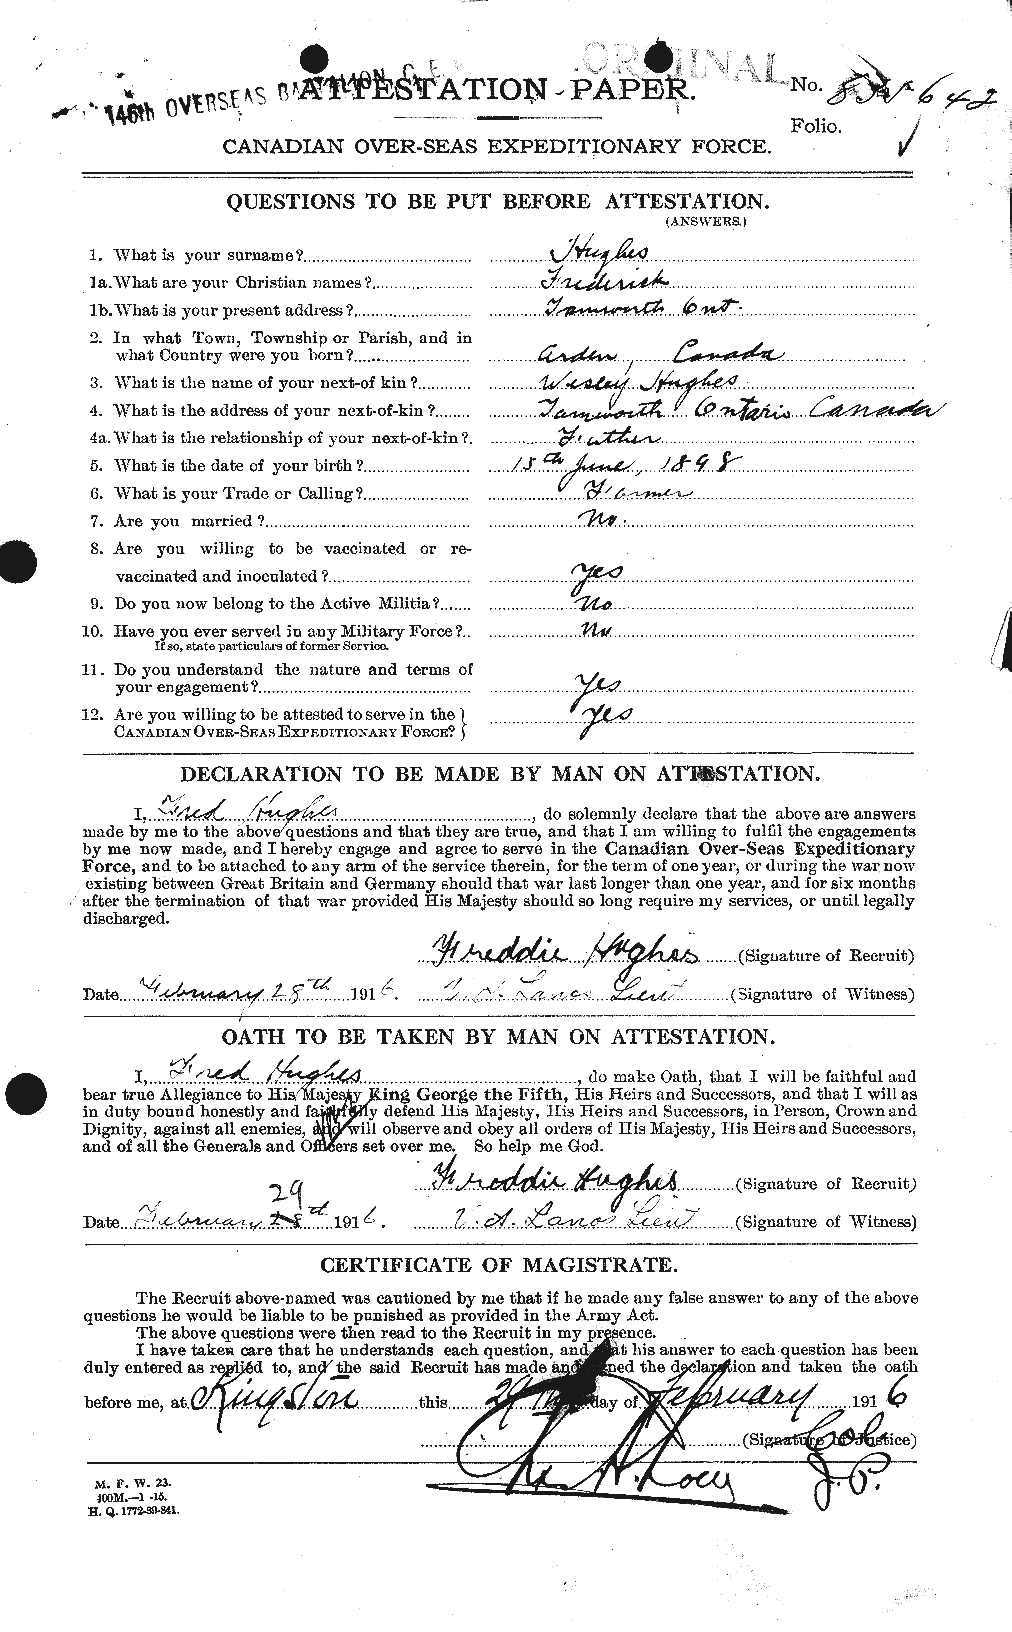 Personnel Records of the First World War - CEF 403788a